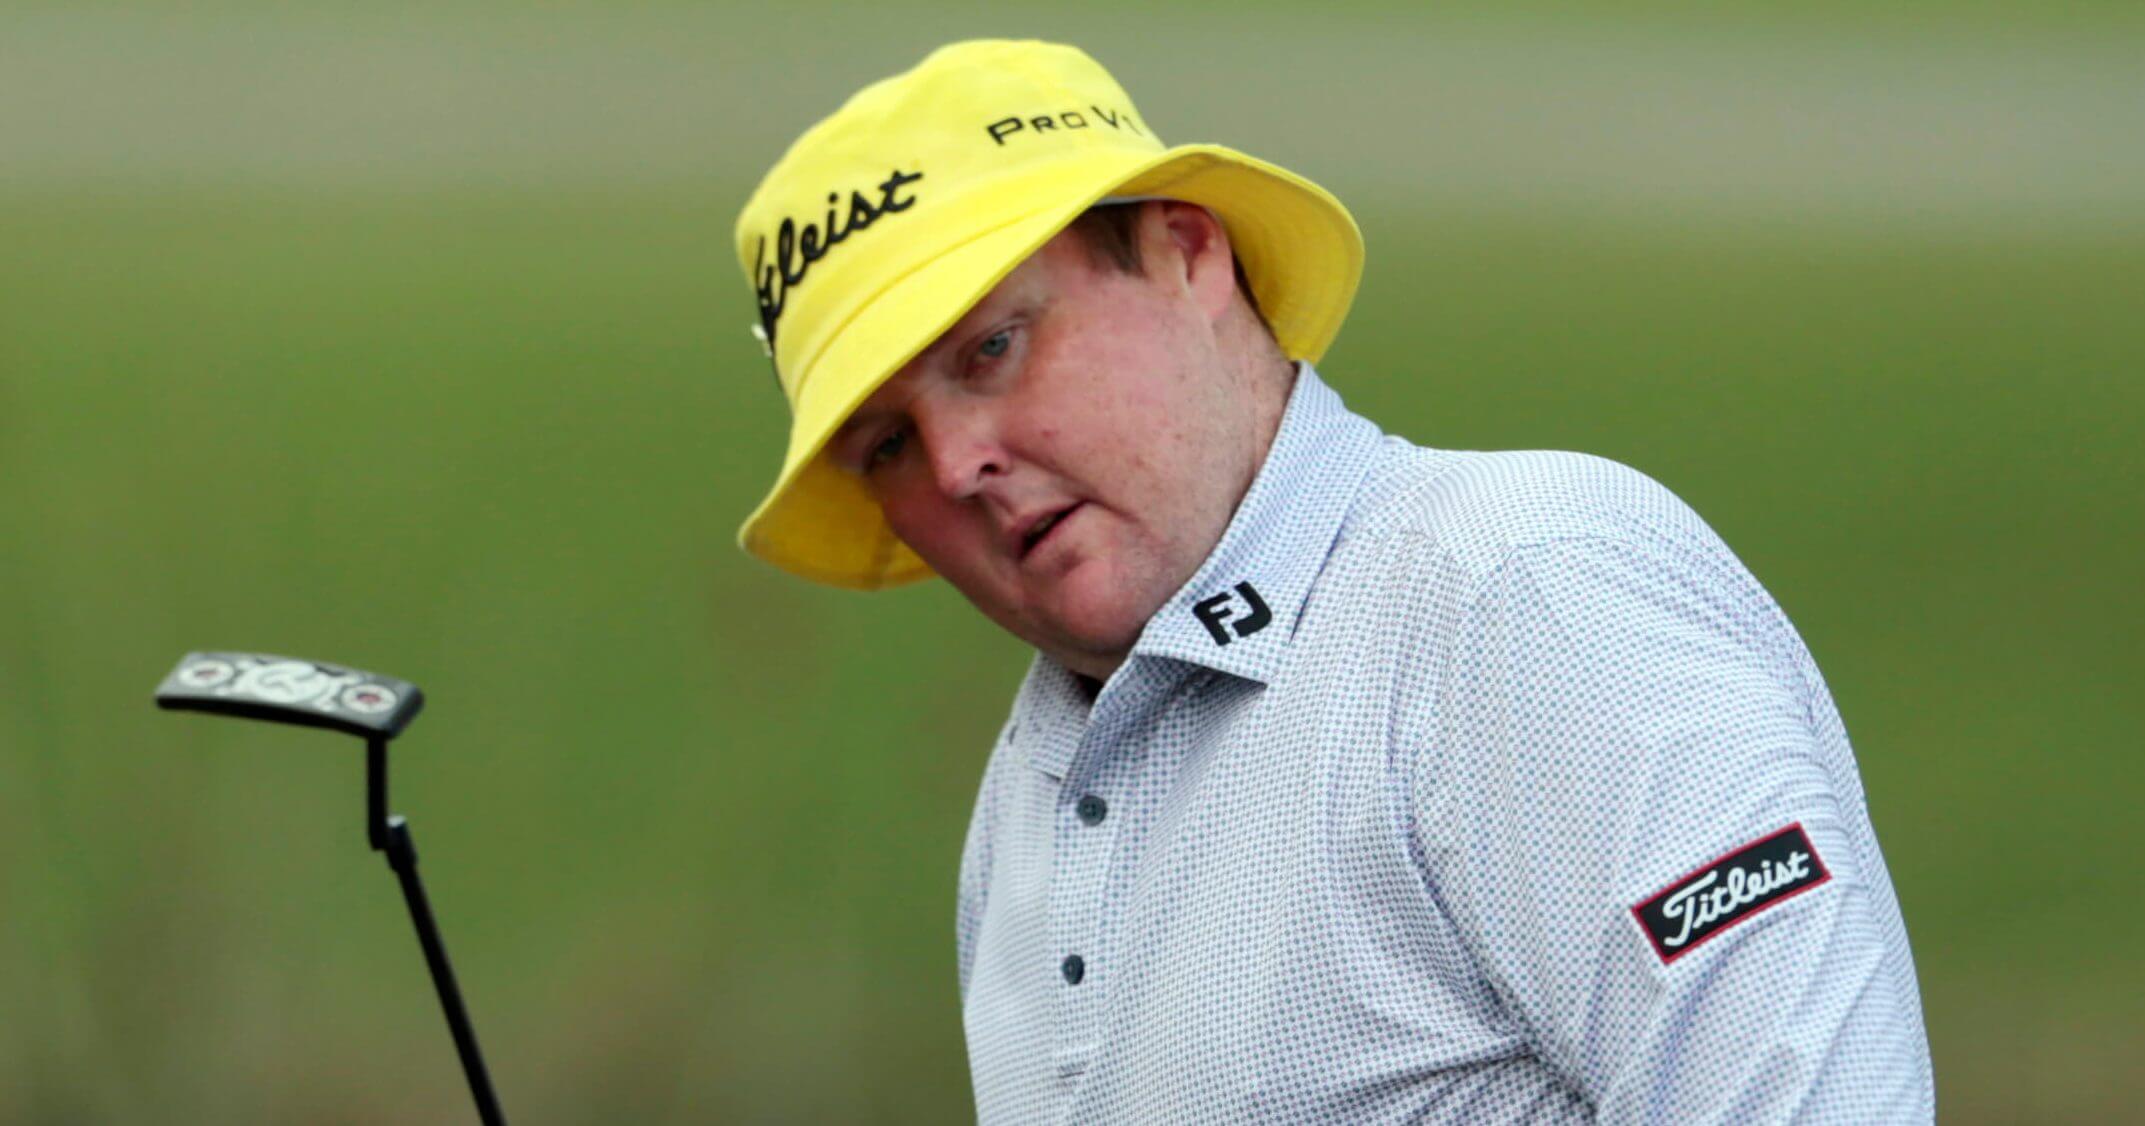 In this April 23, 2015 file photo, Jarrod Lyle, of Australia, reacts after missing a putt on the 17th hole during the first round of the Zurich Classic PGA golf tournament in Avondale, La. Jarrod Lyle has opted not to seek further treatment in his long fight against leukemia and will receive palliative care at home, his family has announced.